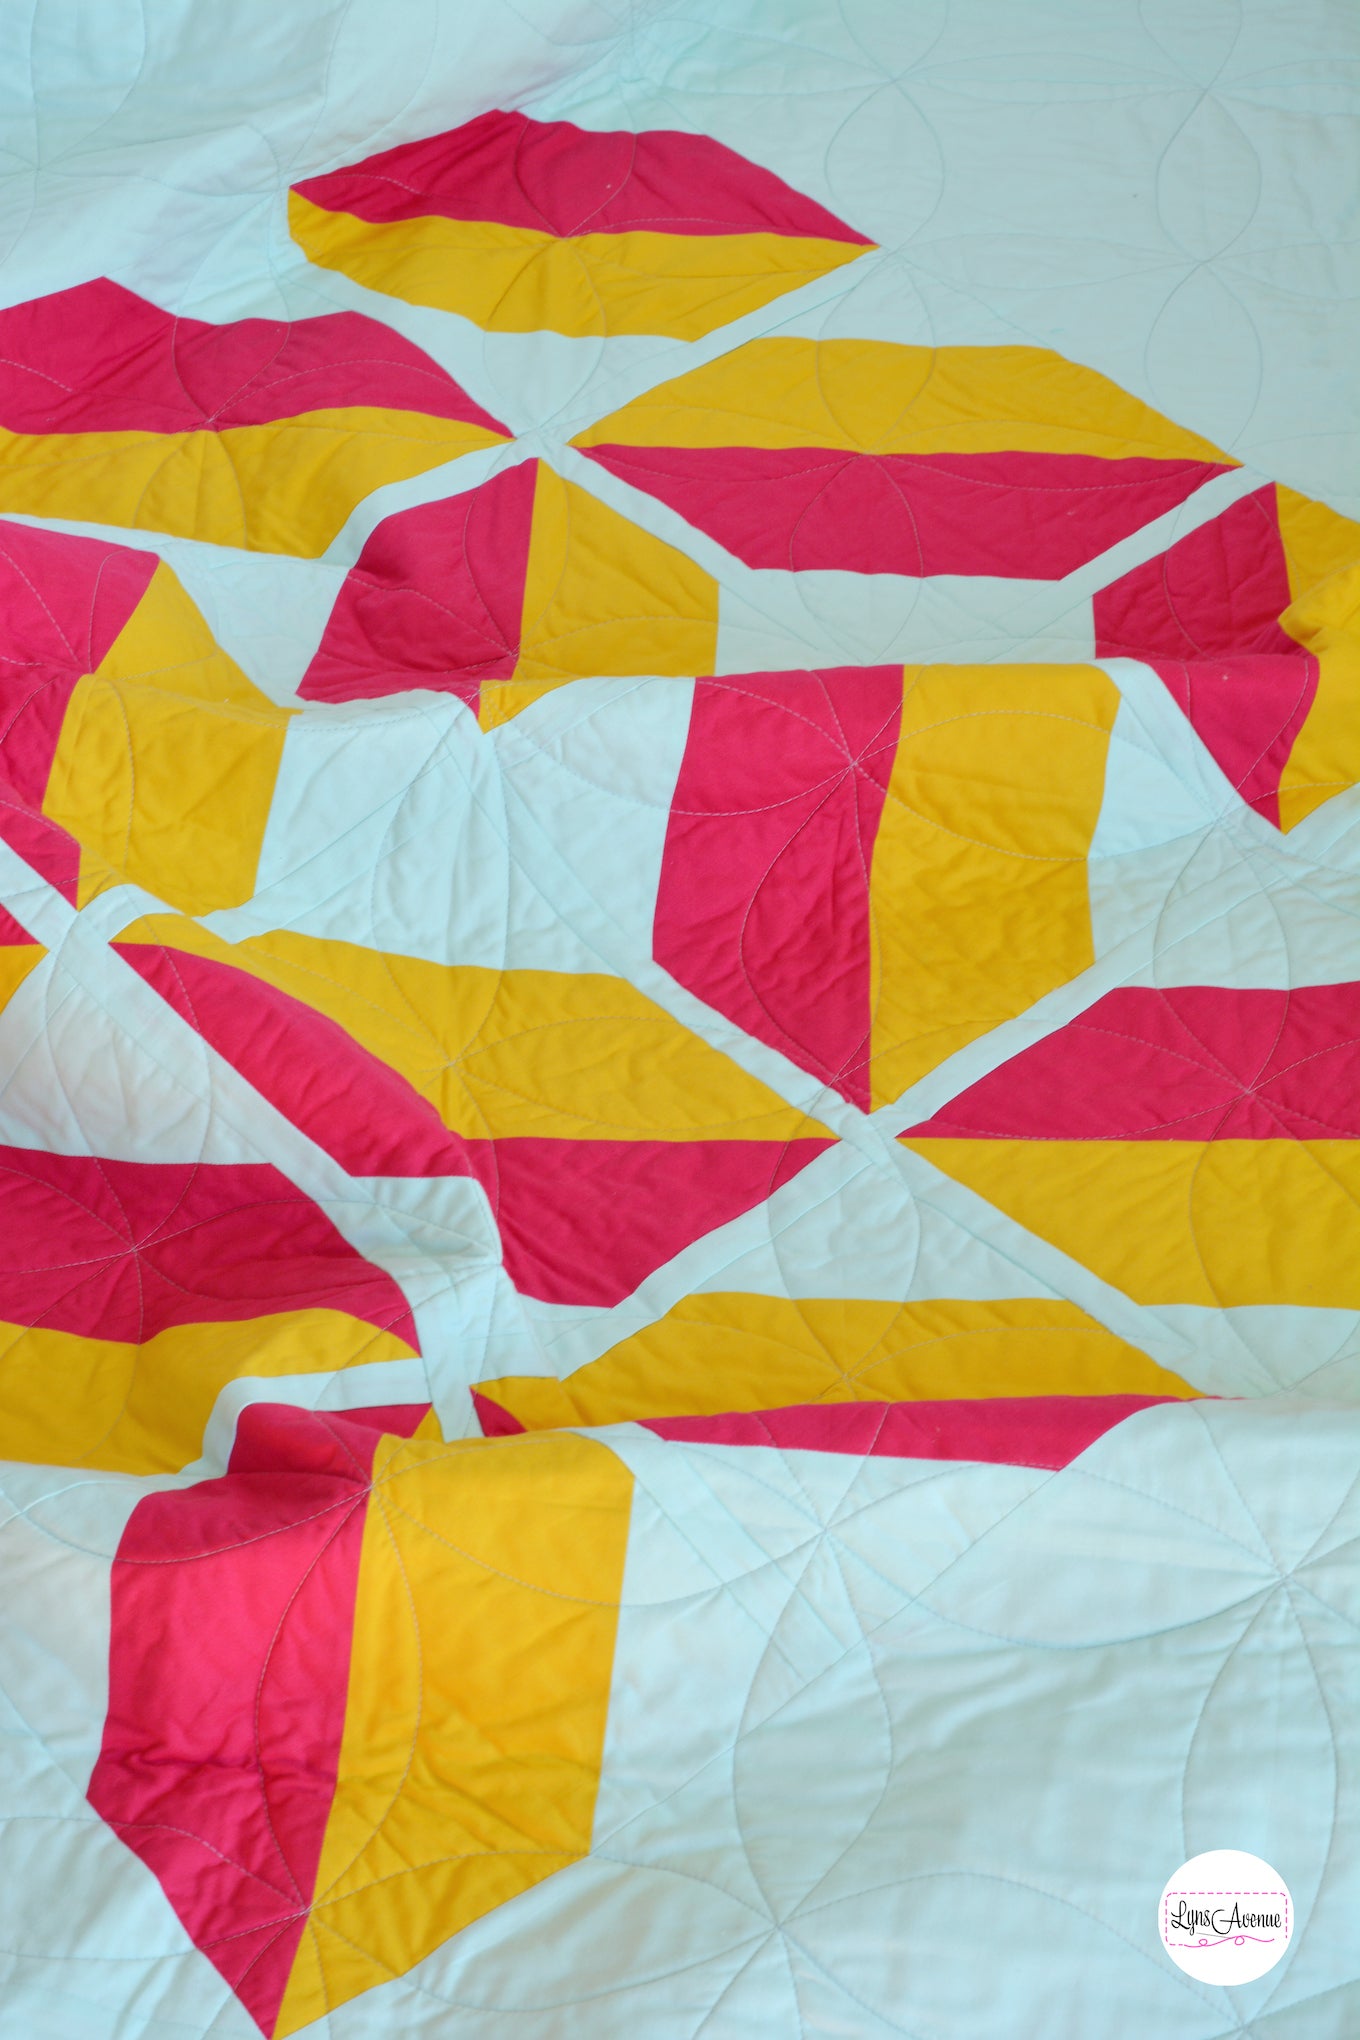 Red and Yellow flourishing quilt pattern on a mint background